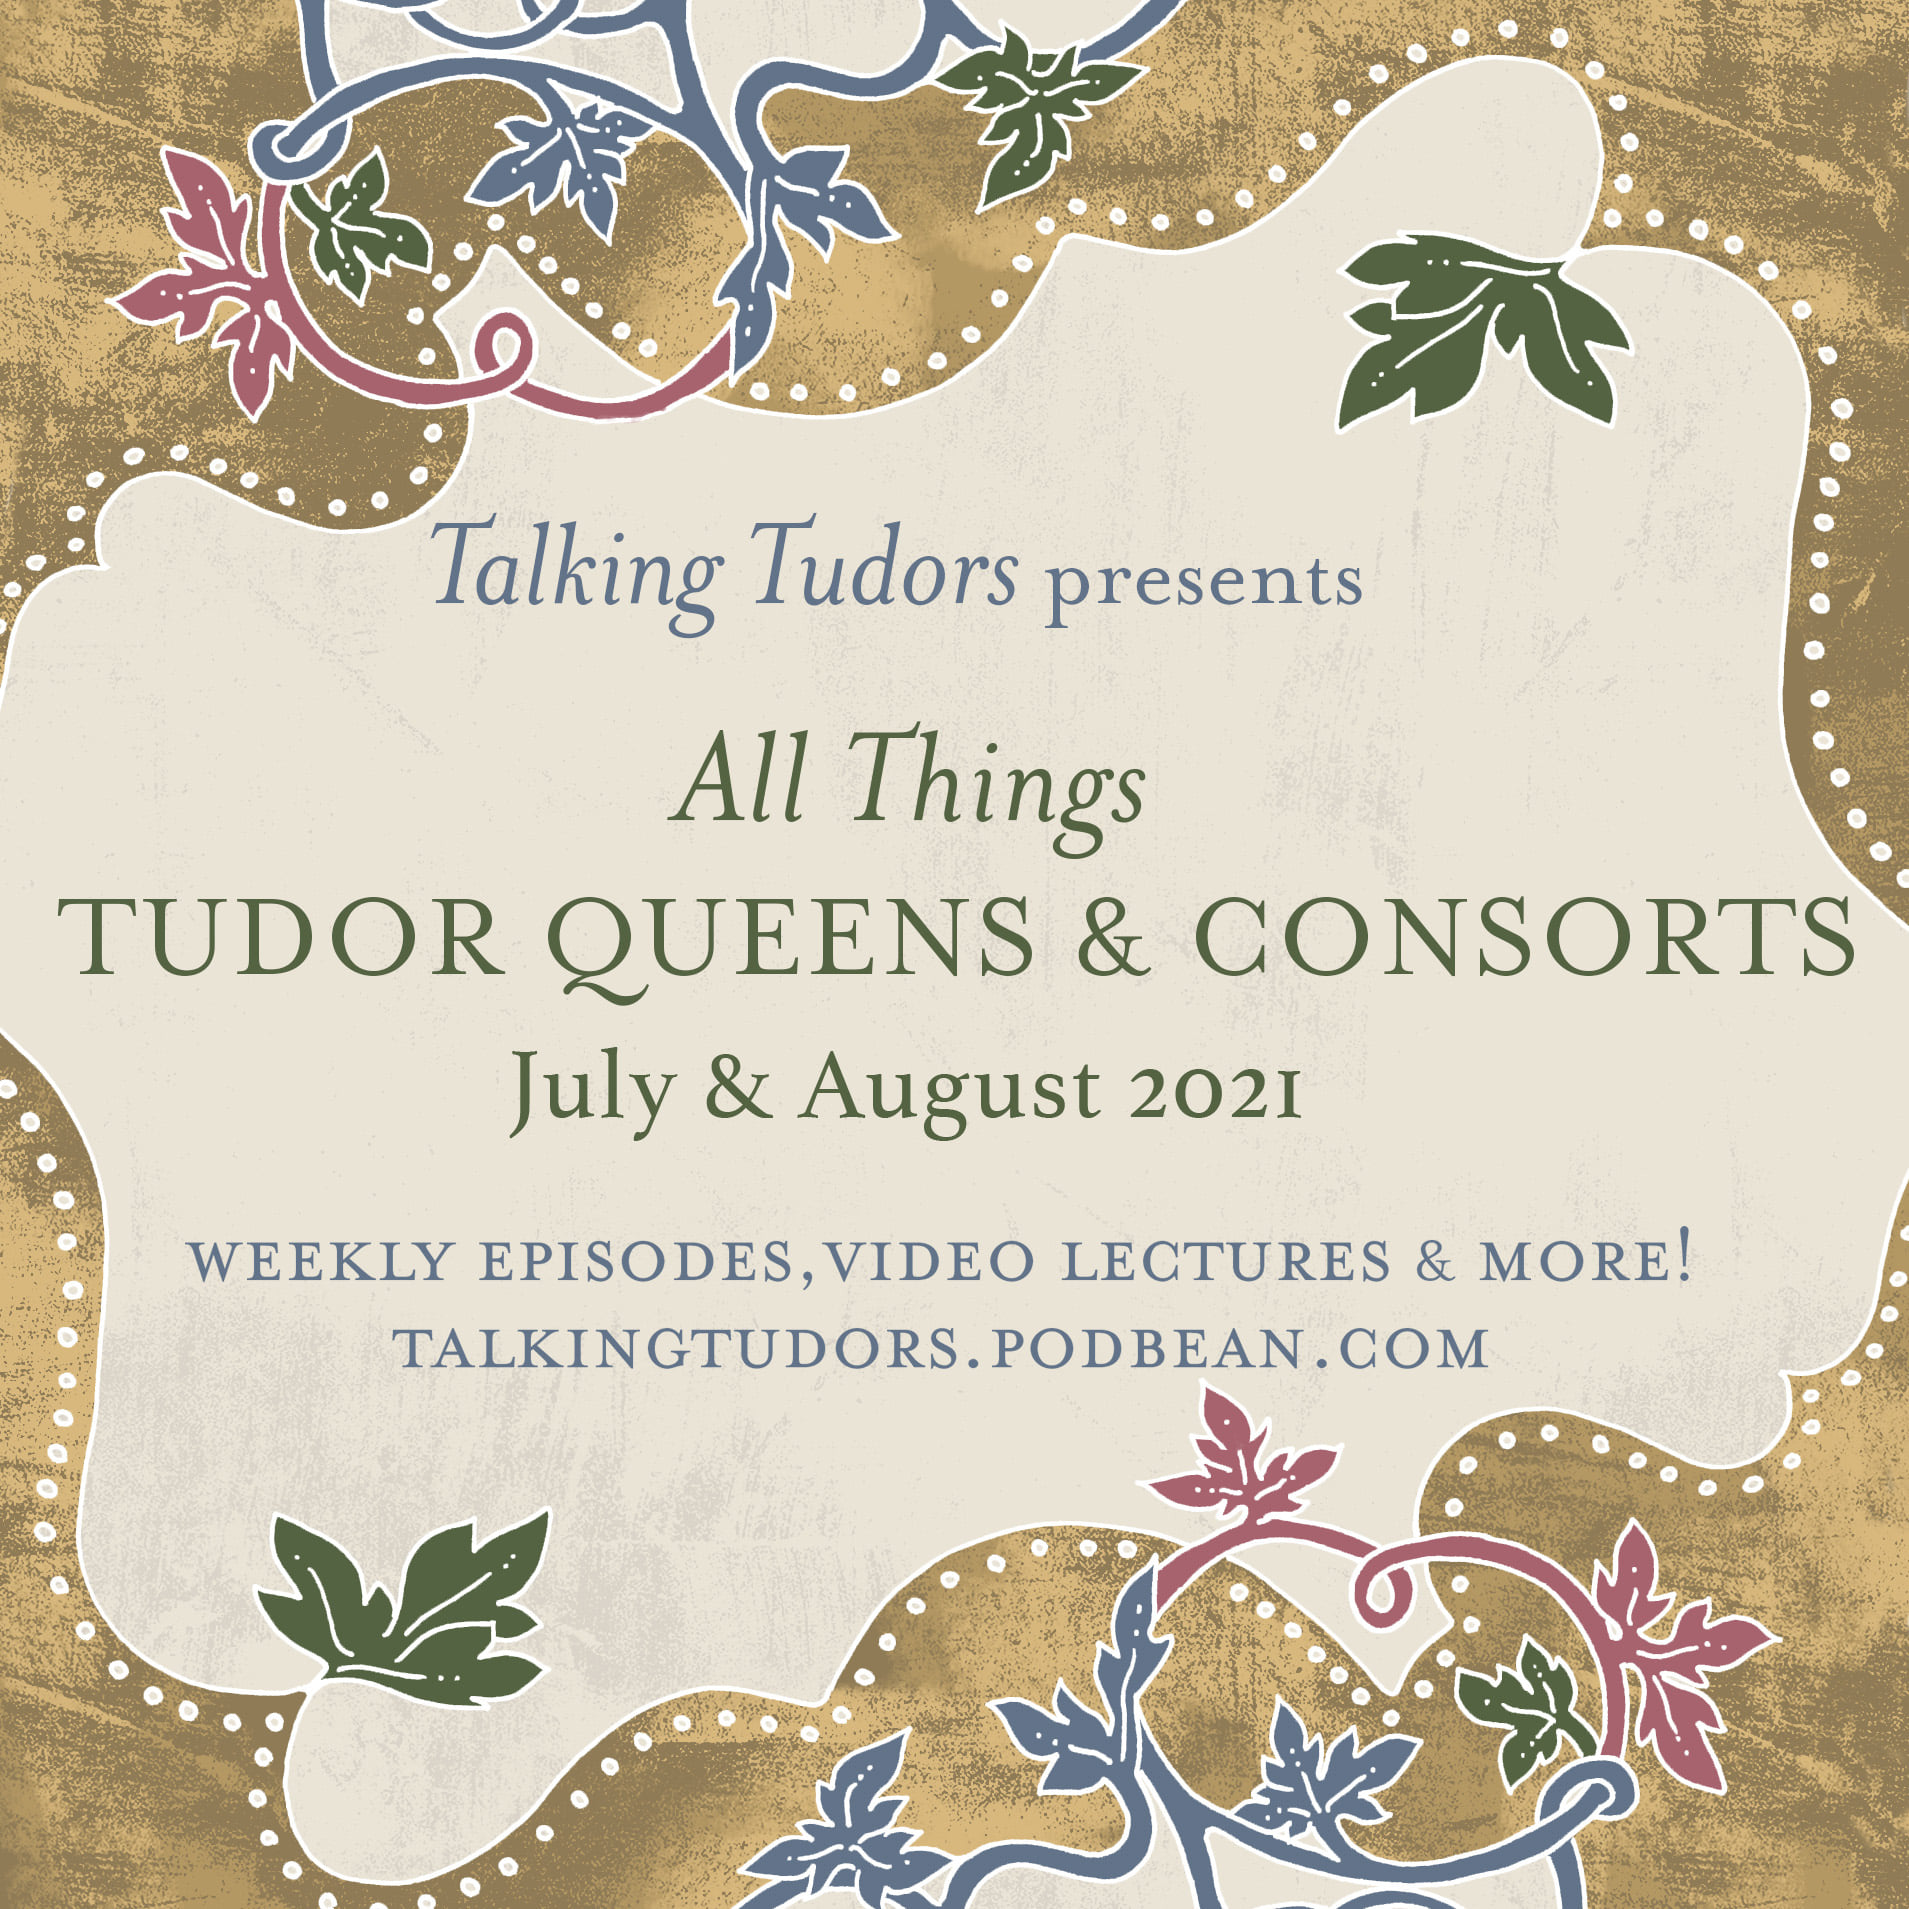 All Things Tudor Queens & Consorts